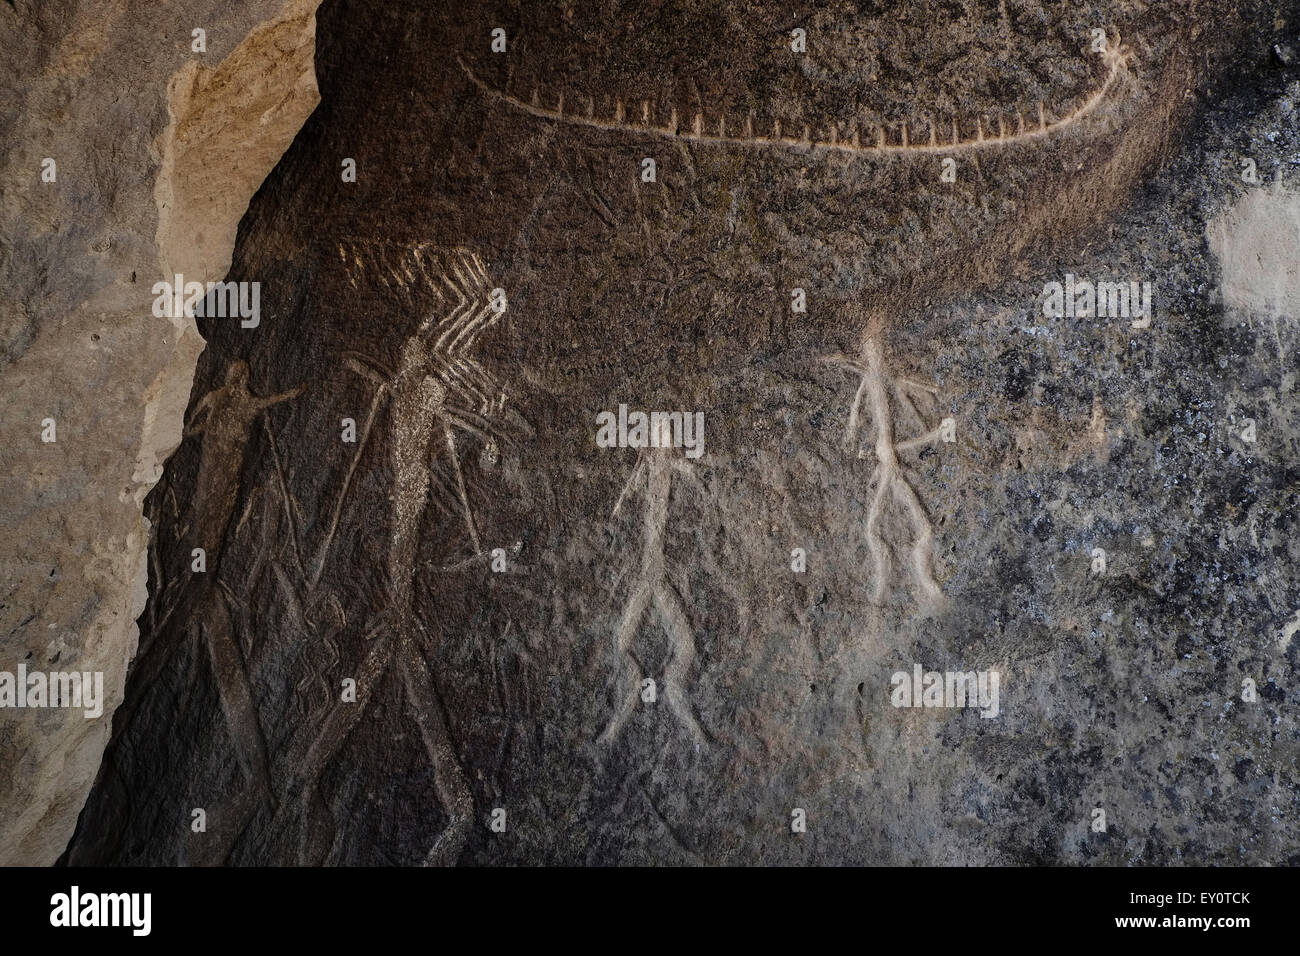 Ancient Petroglyphs dating back to 10,000 BC indicating a thriving culture at Gobustan National Park UNESCO World Heritage Site in Azerbaijan. Stock Photo